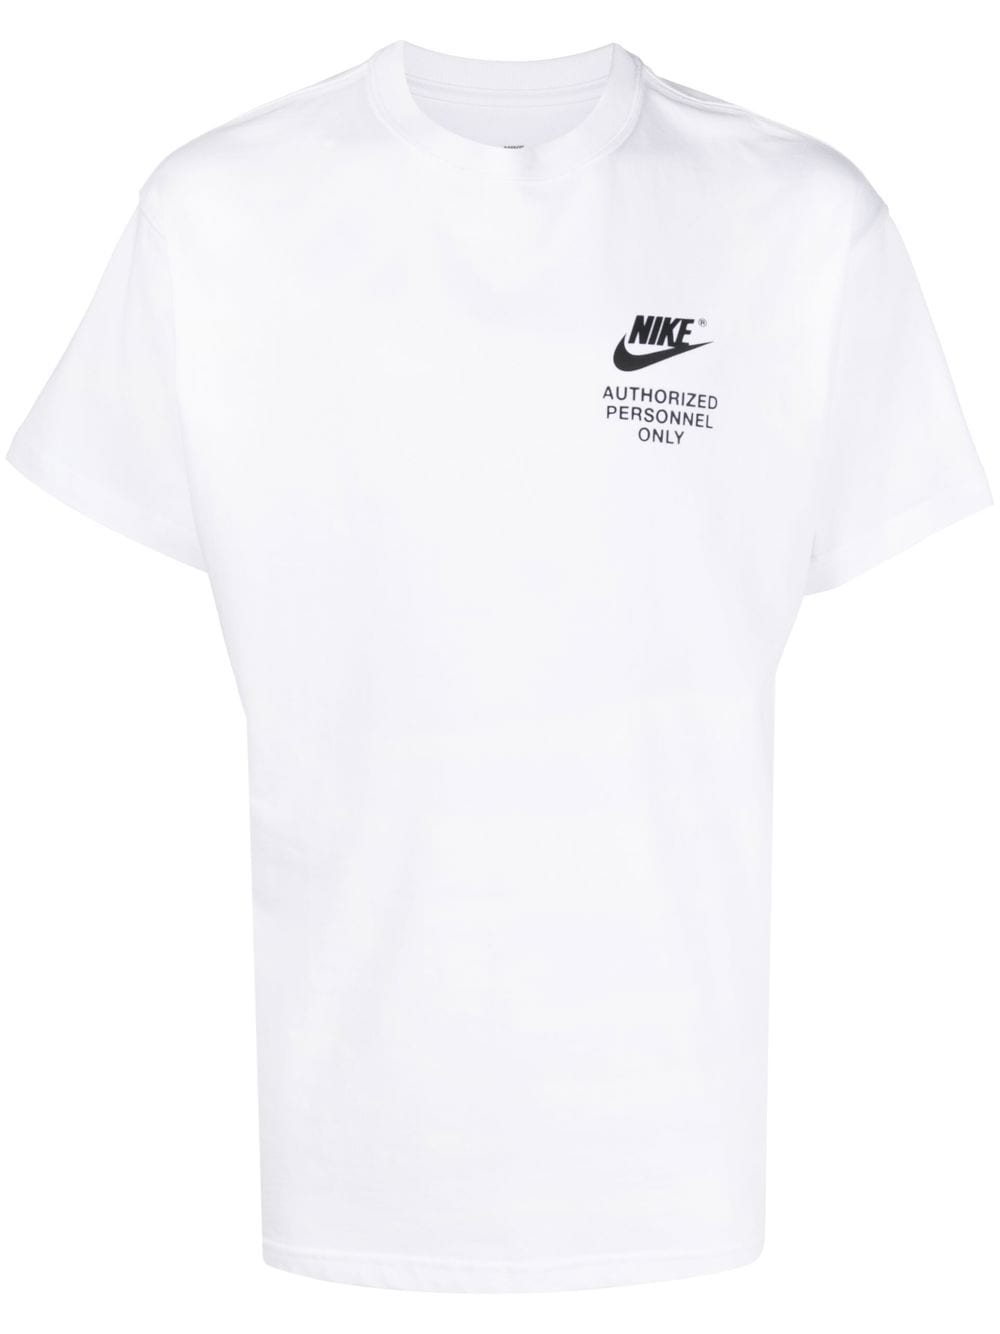 Nike 'Authorized Personnel Only' T-shirt - Farfetch